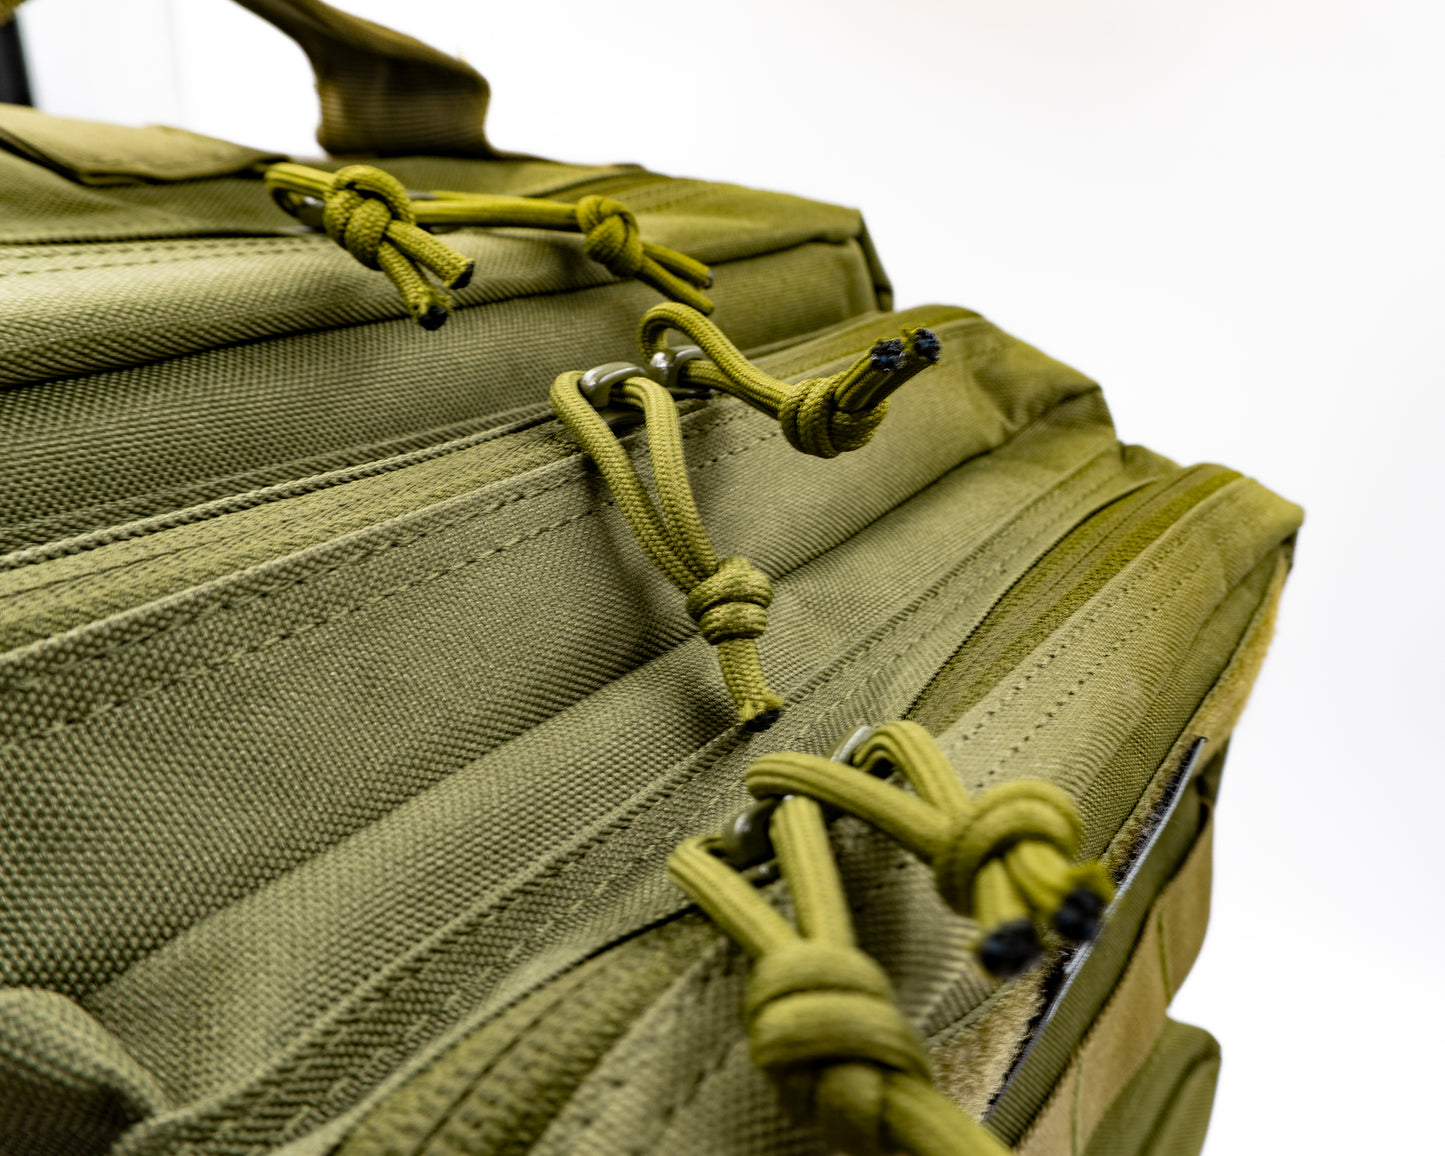 REDCON-1 Pack 45L - Military Green